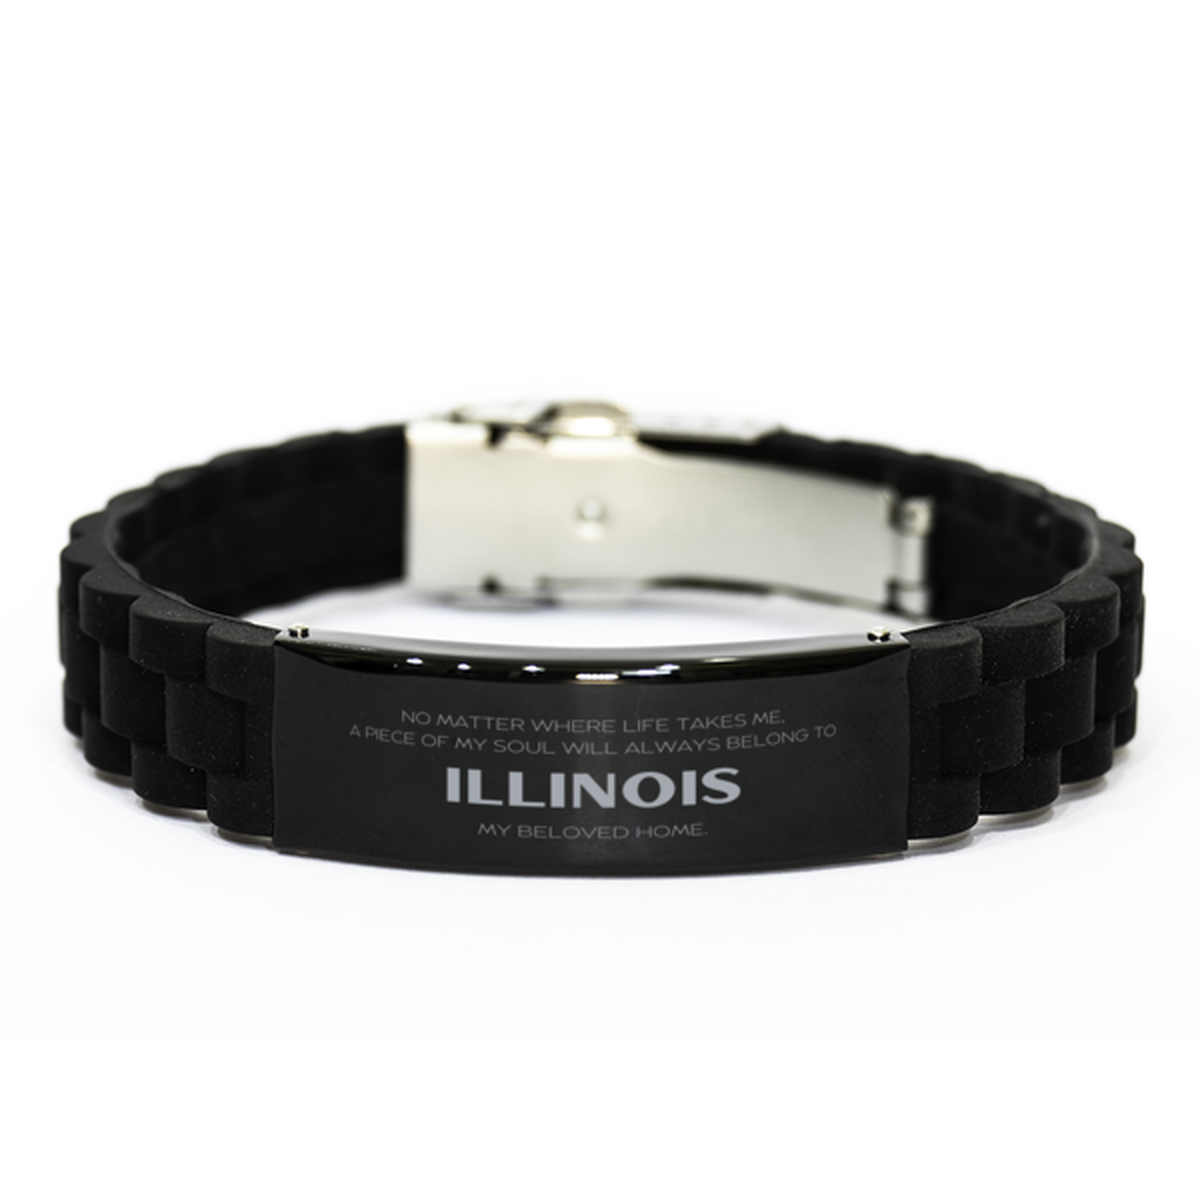 Love Illinois State Gifts, My soul will always belong to Illinois, Proud Black Glidelock Clasp Bracelet, Birthday Unique Gifts For Illinois Men, Women, Friends